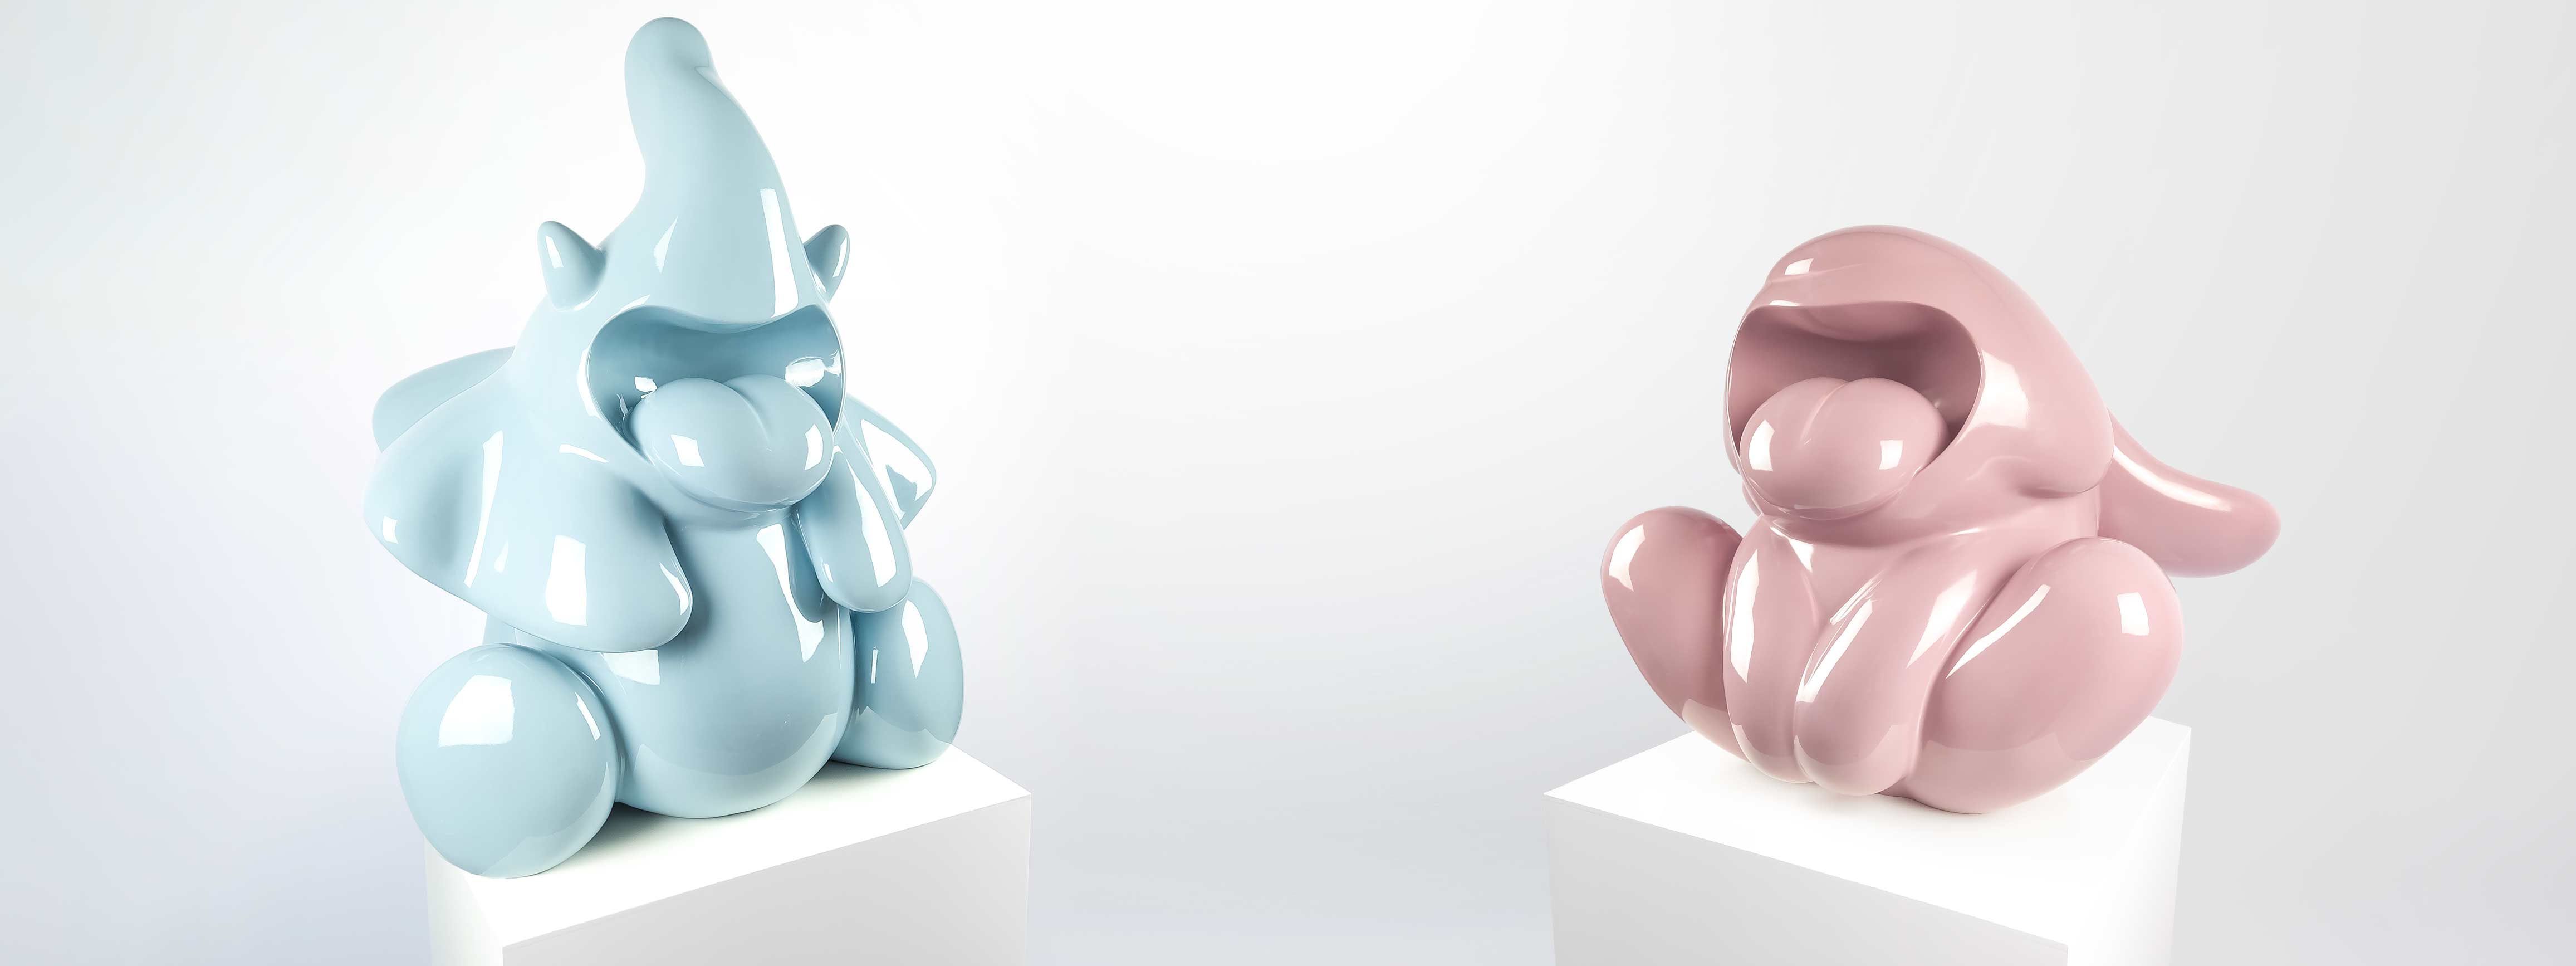 Bunnie and Ellie Roar Stainless Steel, a bunny colour pink and elaphant in blue, Limited edition, designed by Ferdi B Dick